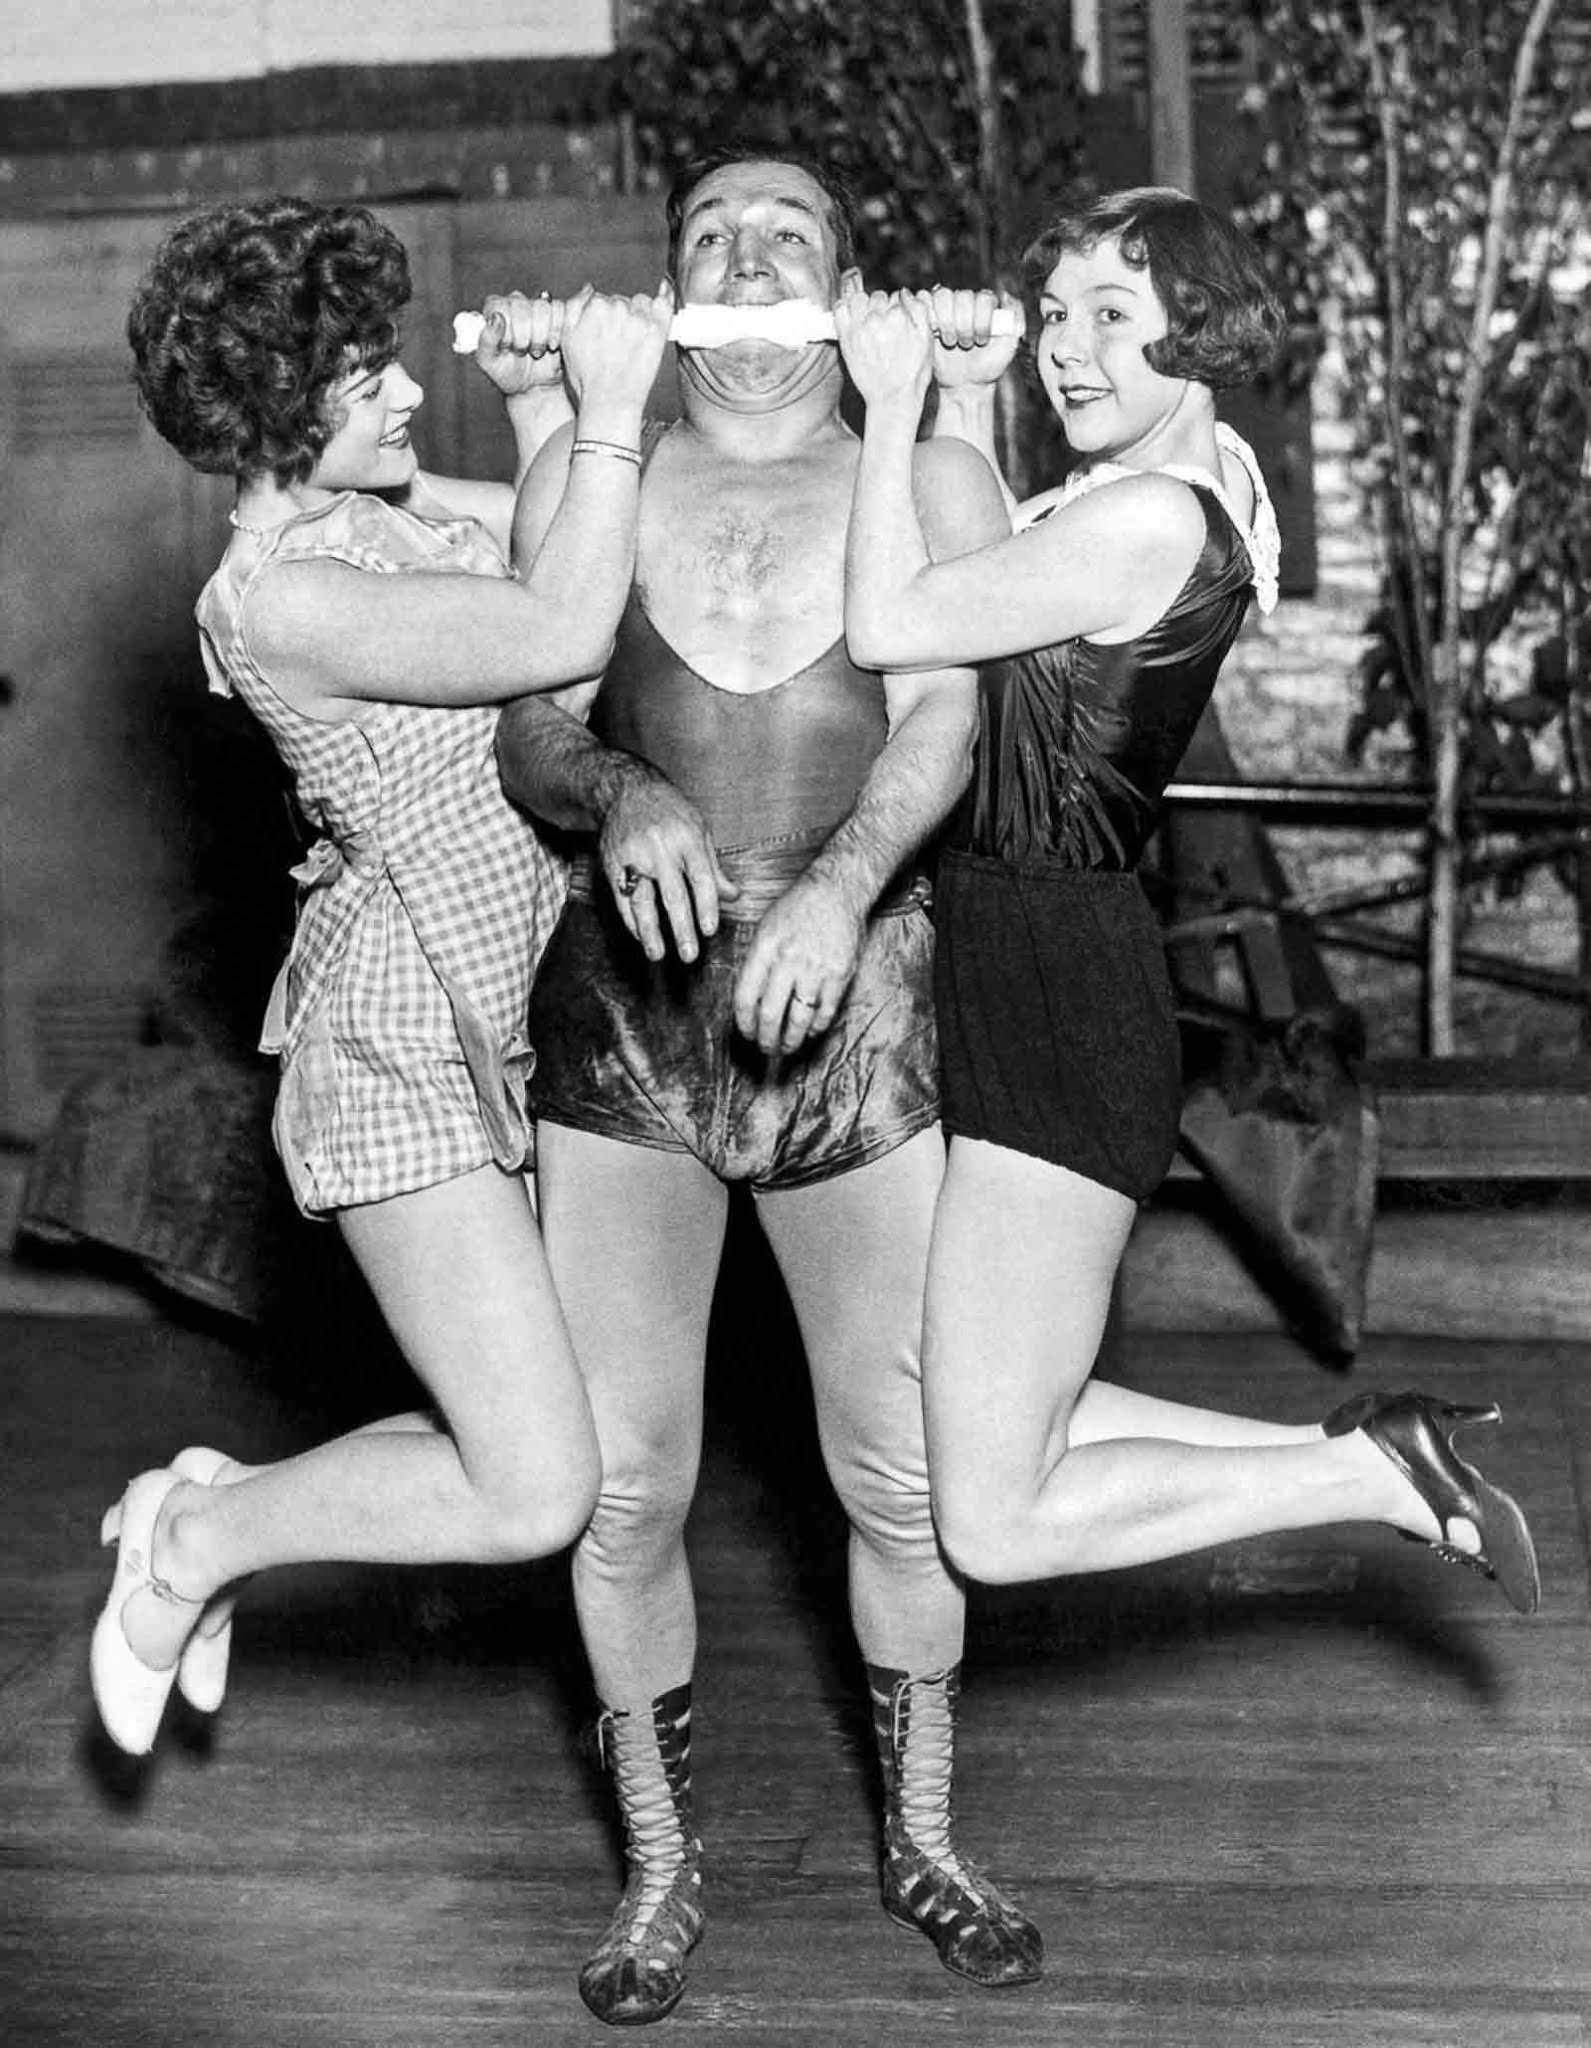 Edward Reece holds up two women with his teeth, 1927.